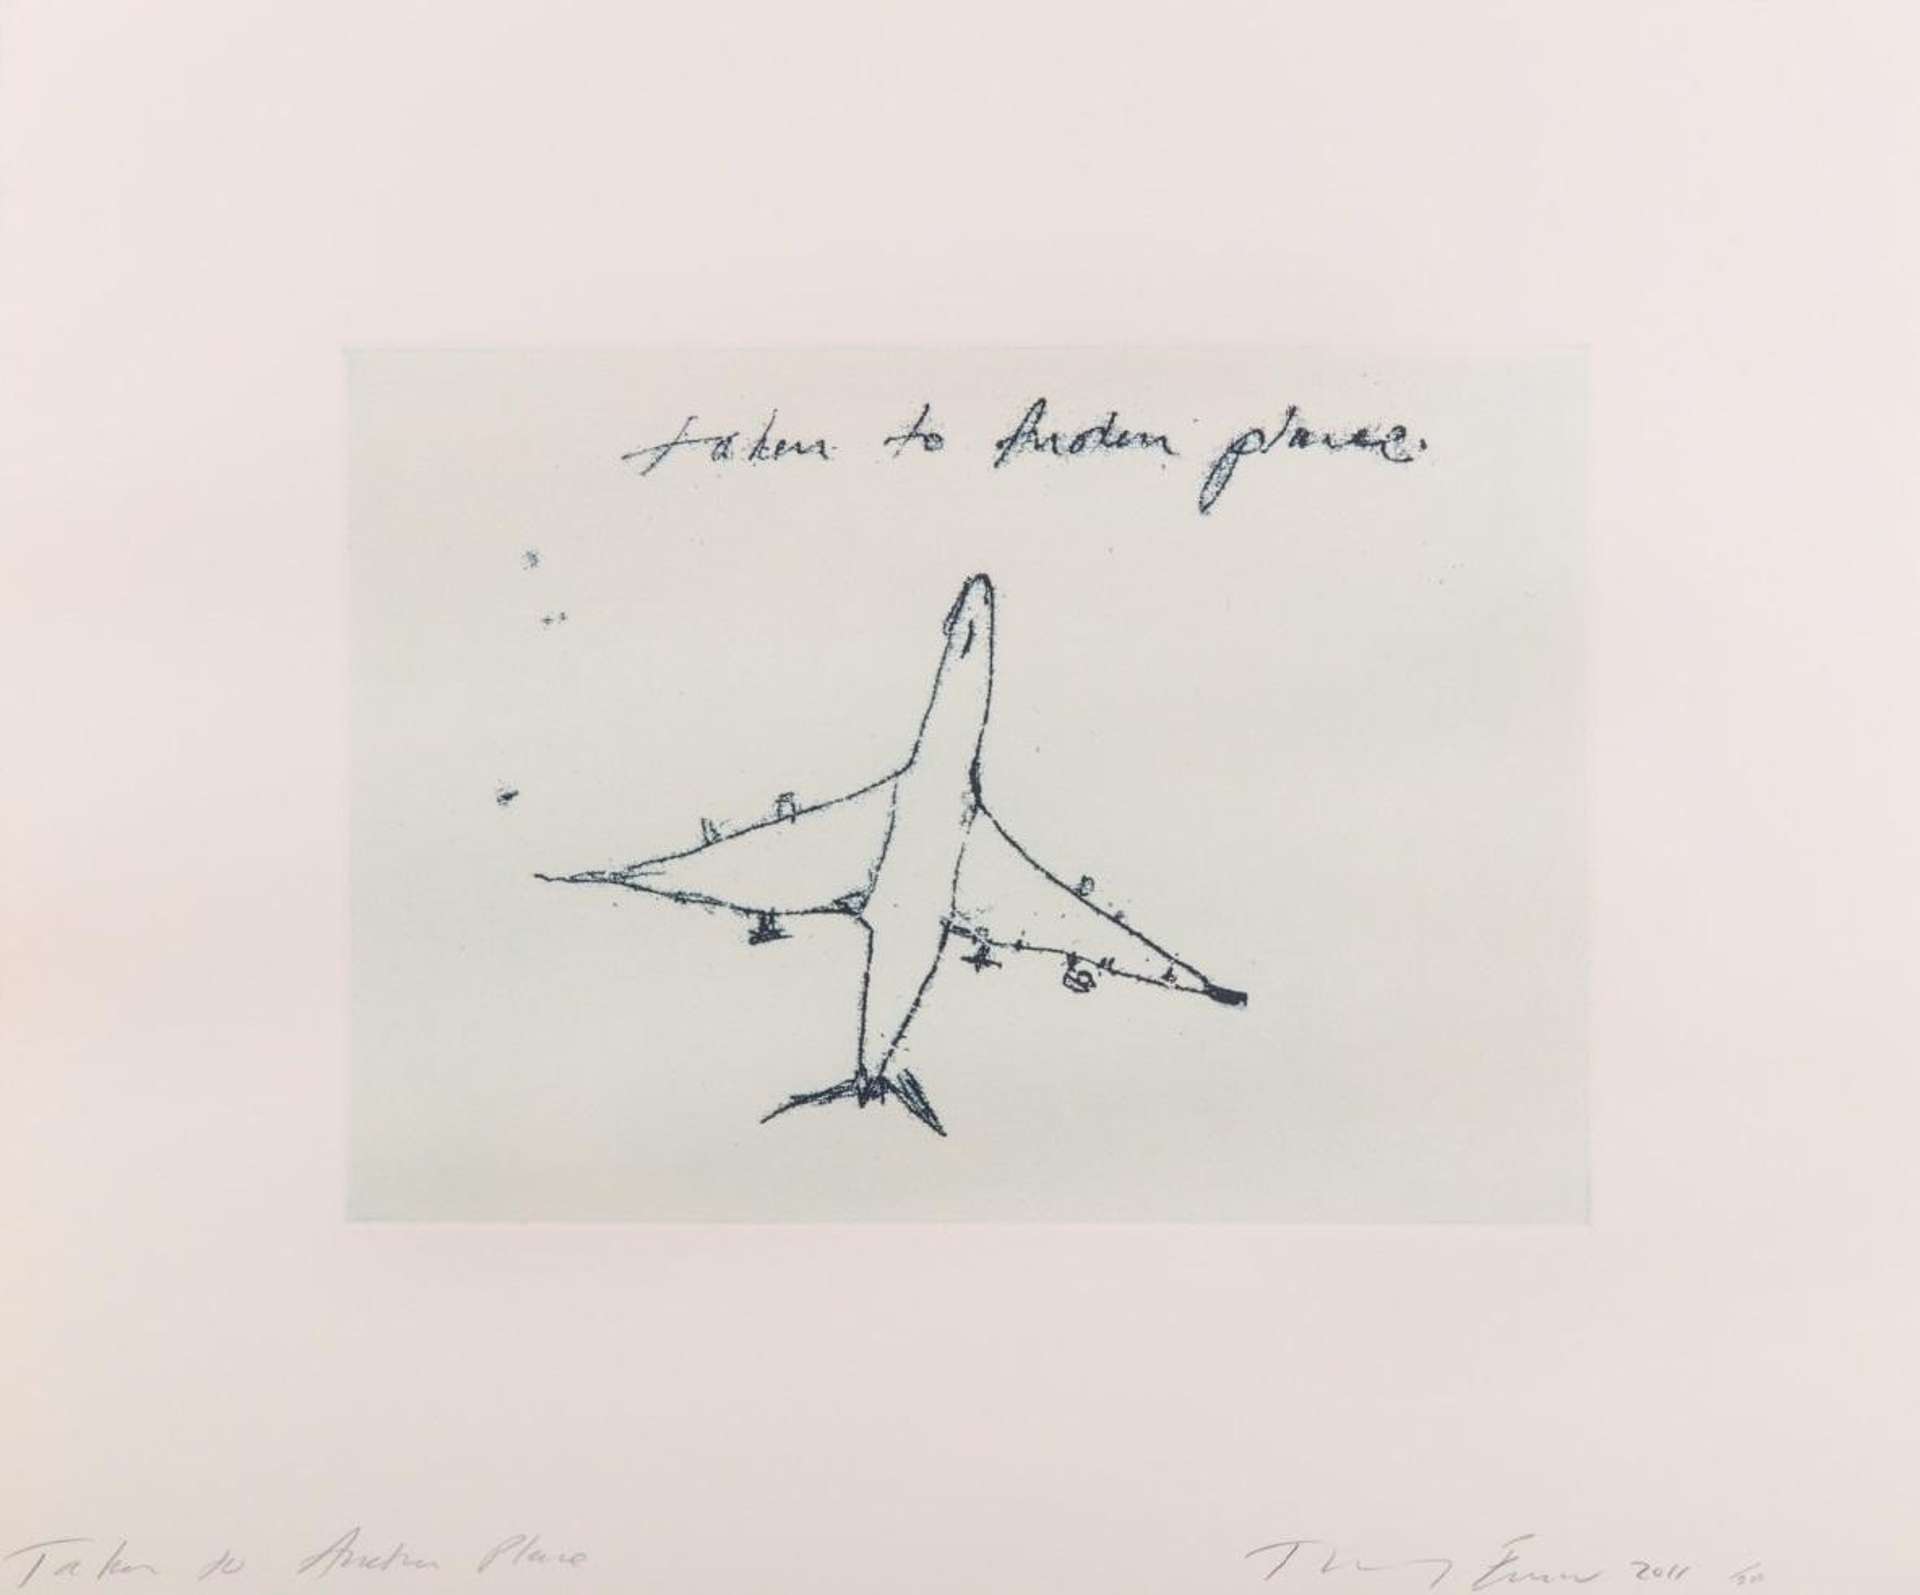 Tracey Emin: Taken To Another Place - Signed Print